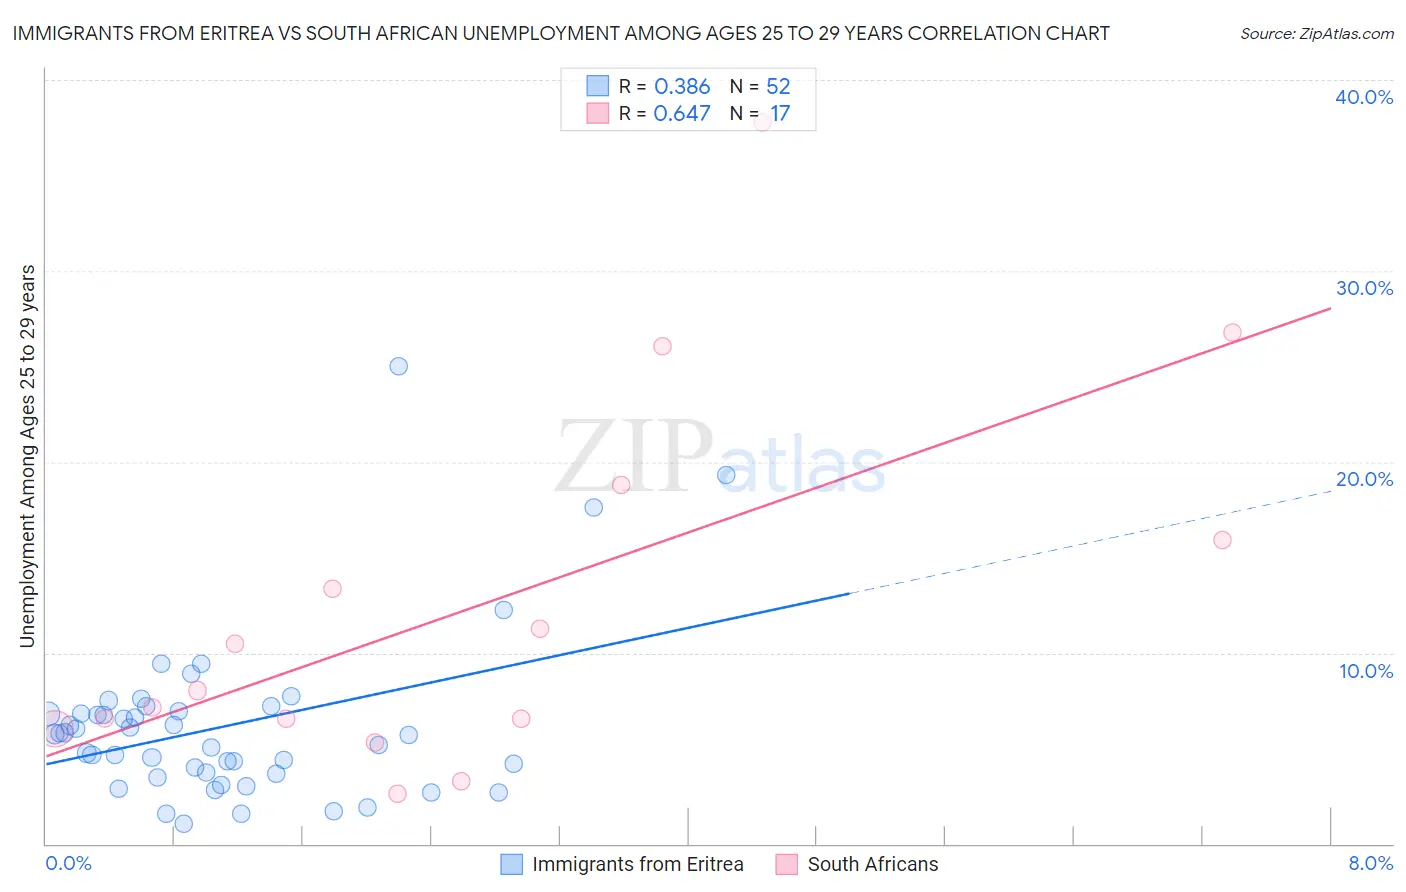 Immigrants from Eritrea vs South African Unemployment Among Ages 25 to 29 years